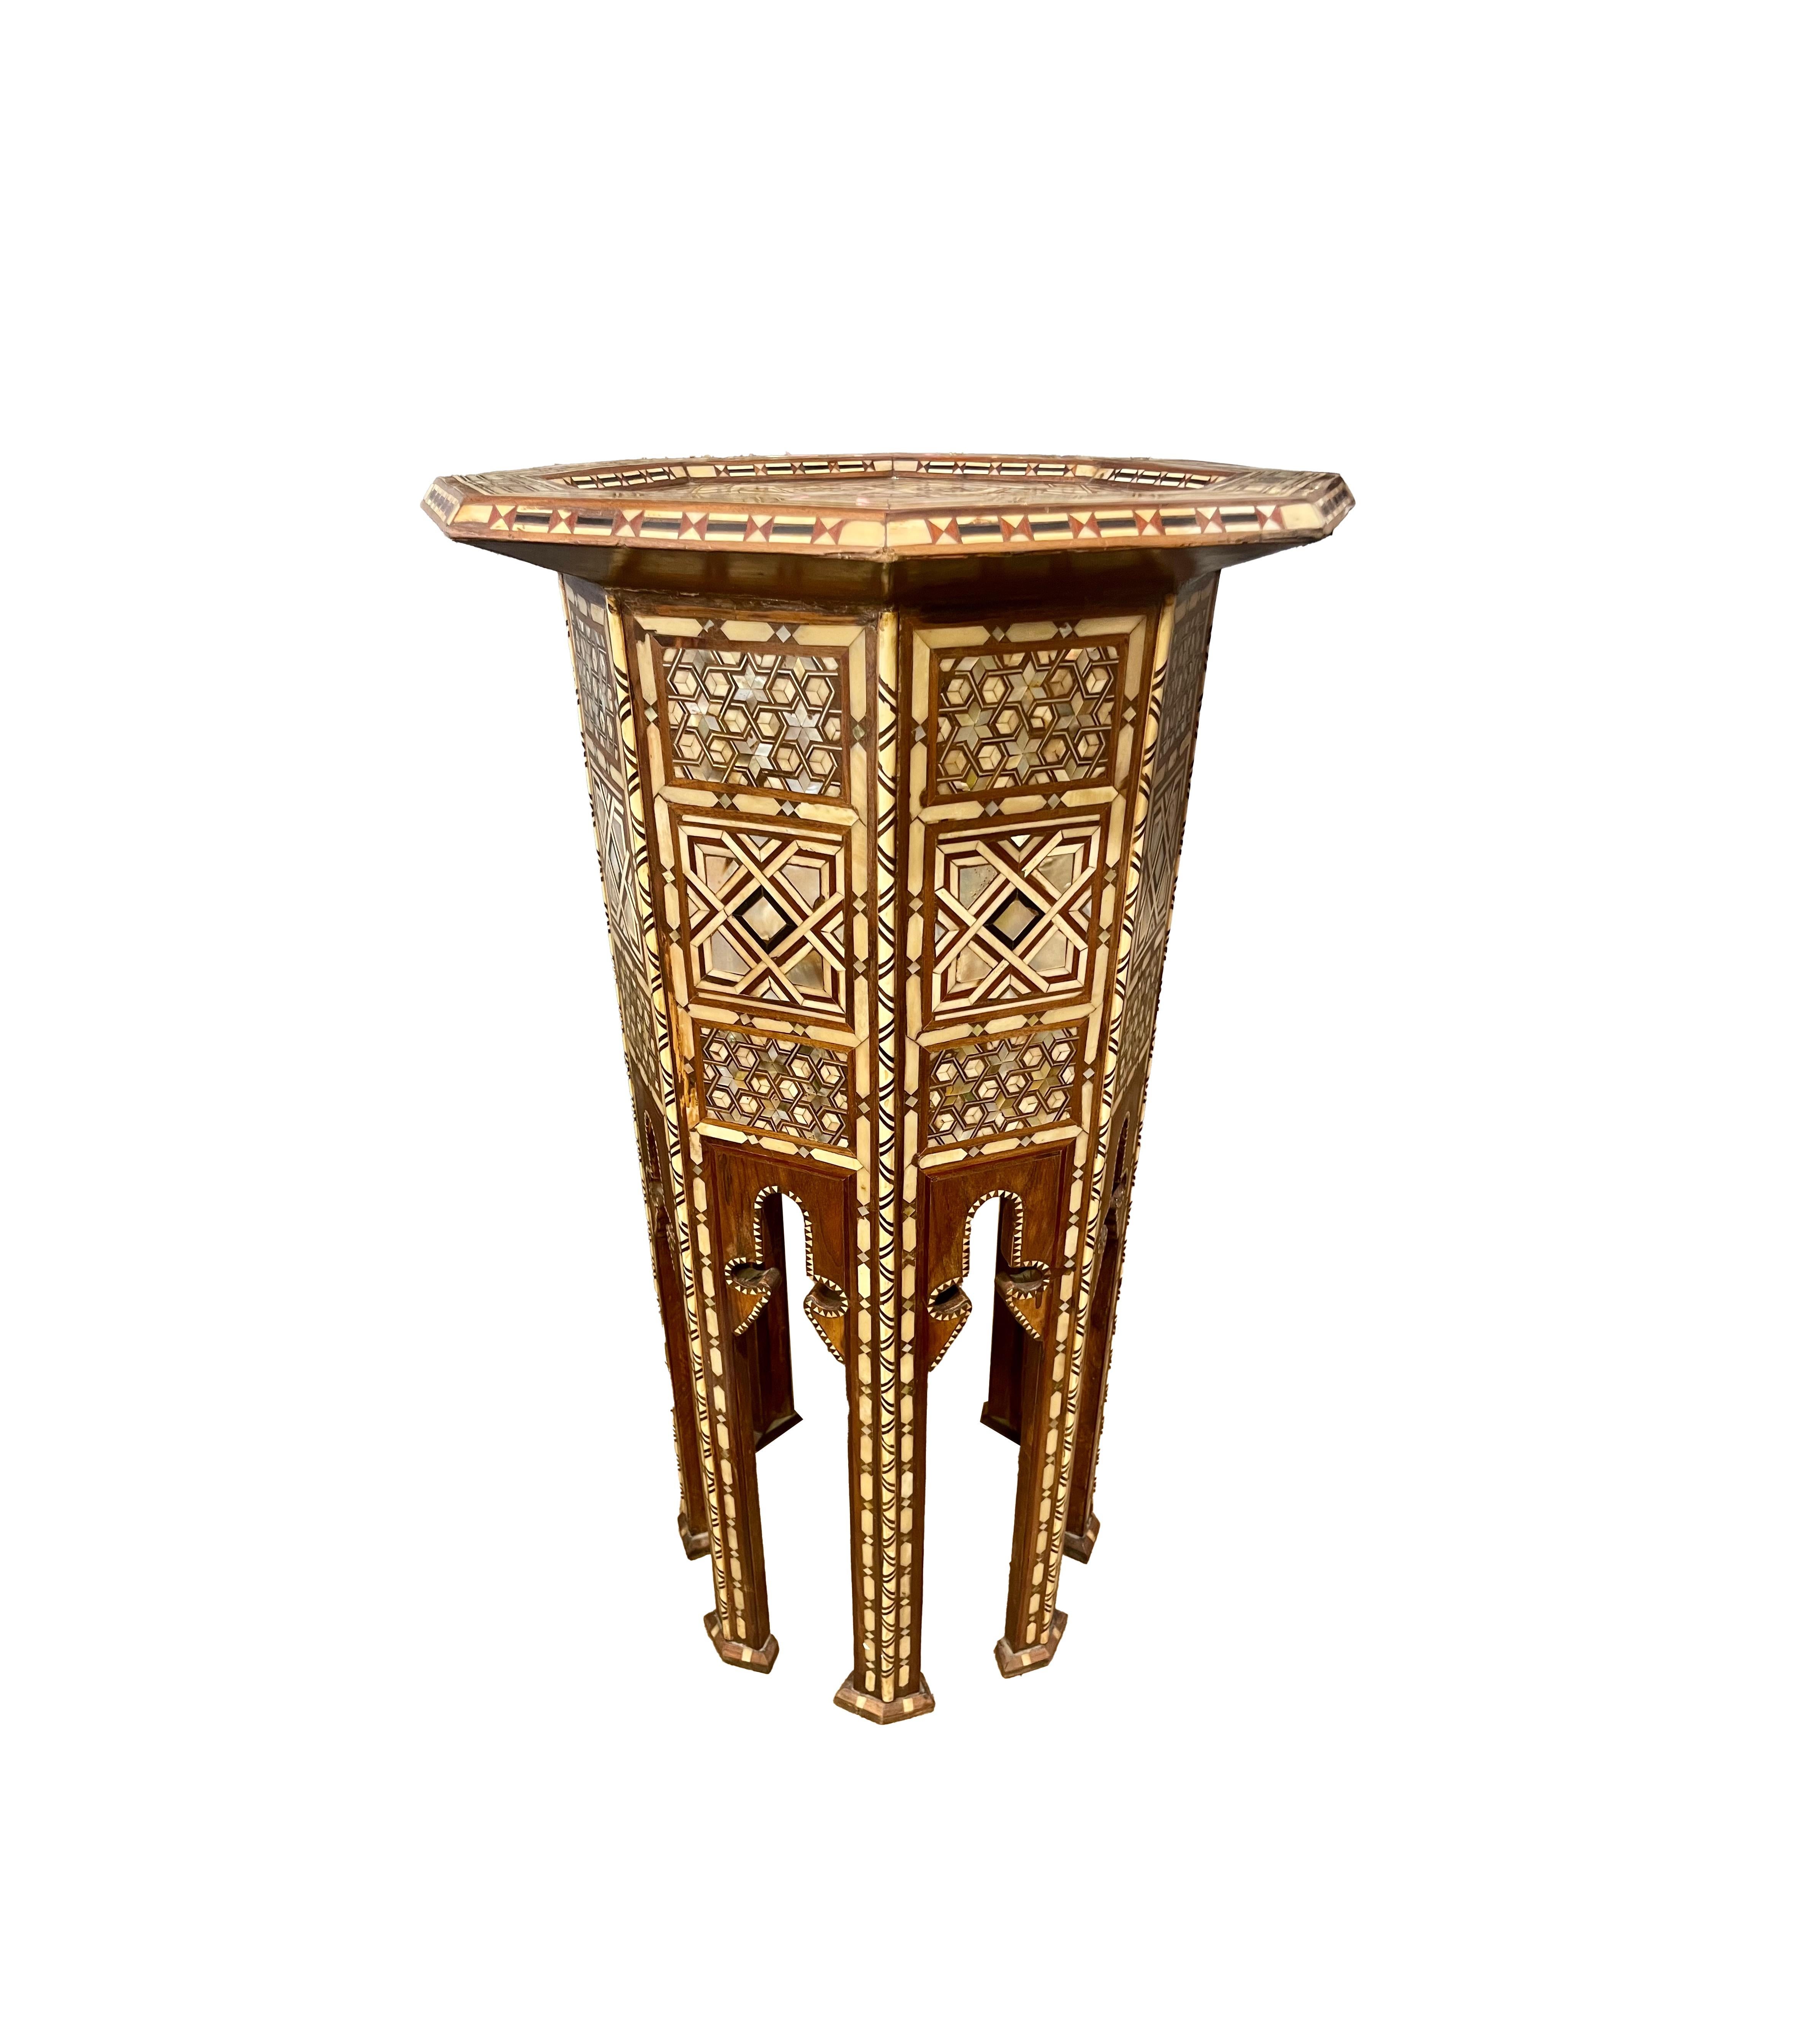 Vintage Moroccan tea table.
Olive wood in laid with mother of pearl, ebony, and camel bone . Circa 1930 